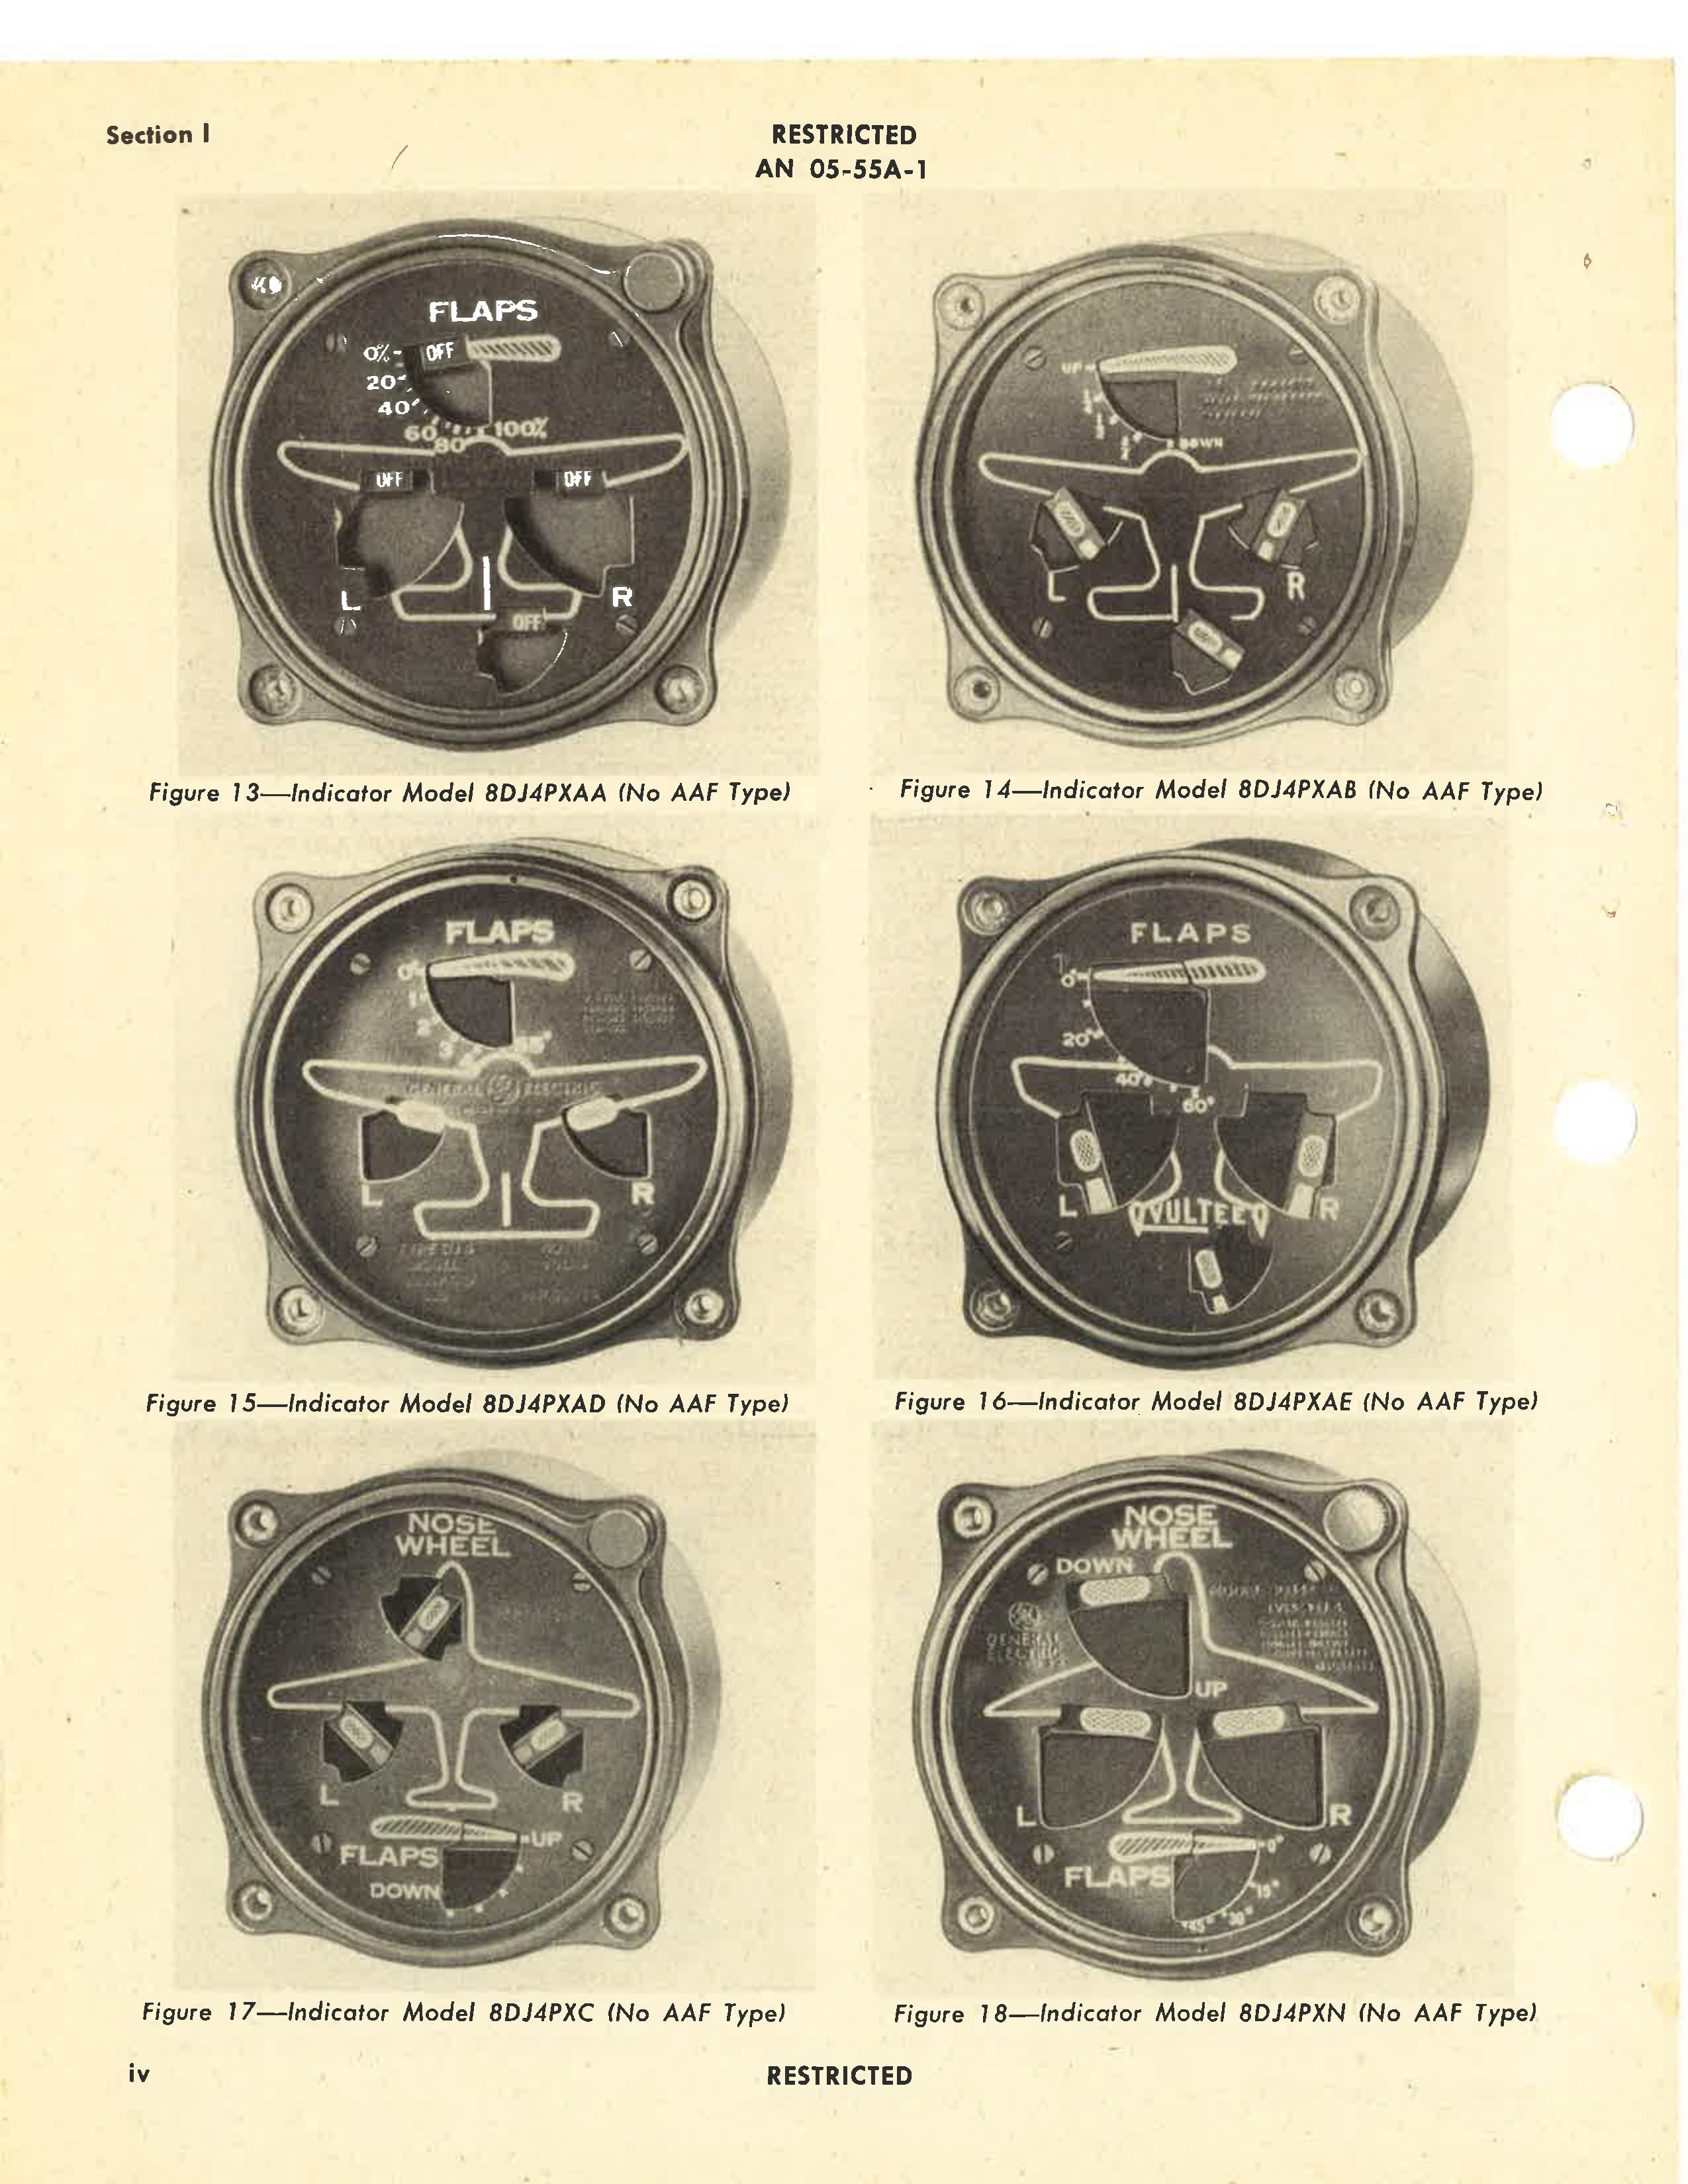 Sample page 6 from AirCorps Library document: Operation and Service Instructions for D-C Selsyn Position Indicators and Transmitters